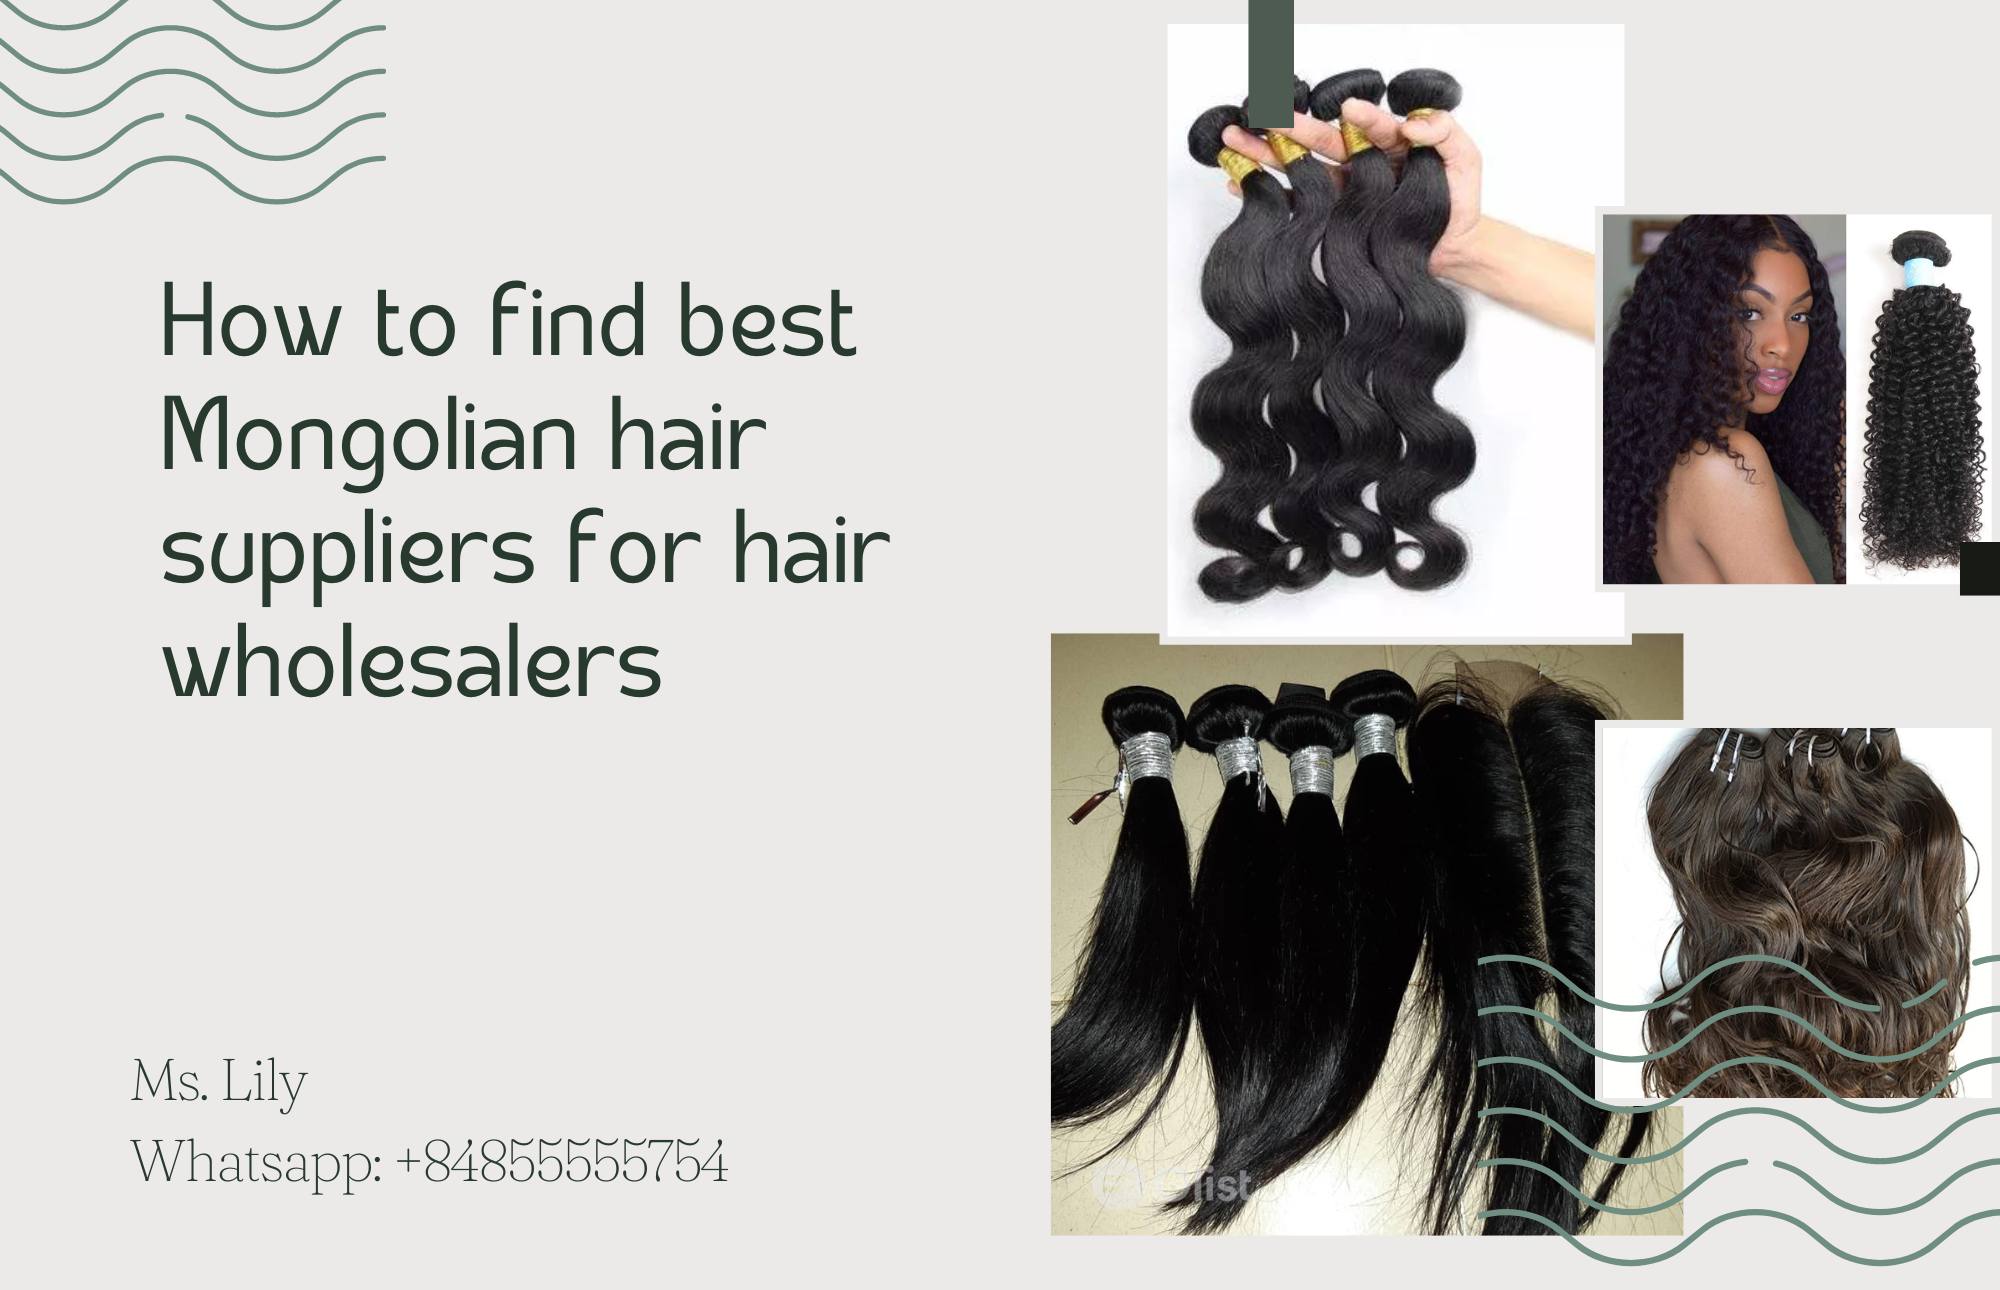 how-to-find-best-mongolian-hair-suppliers-for-hair-wholesalers-1